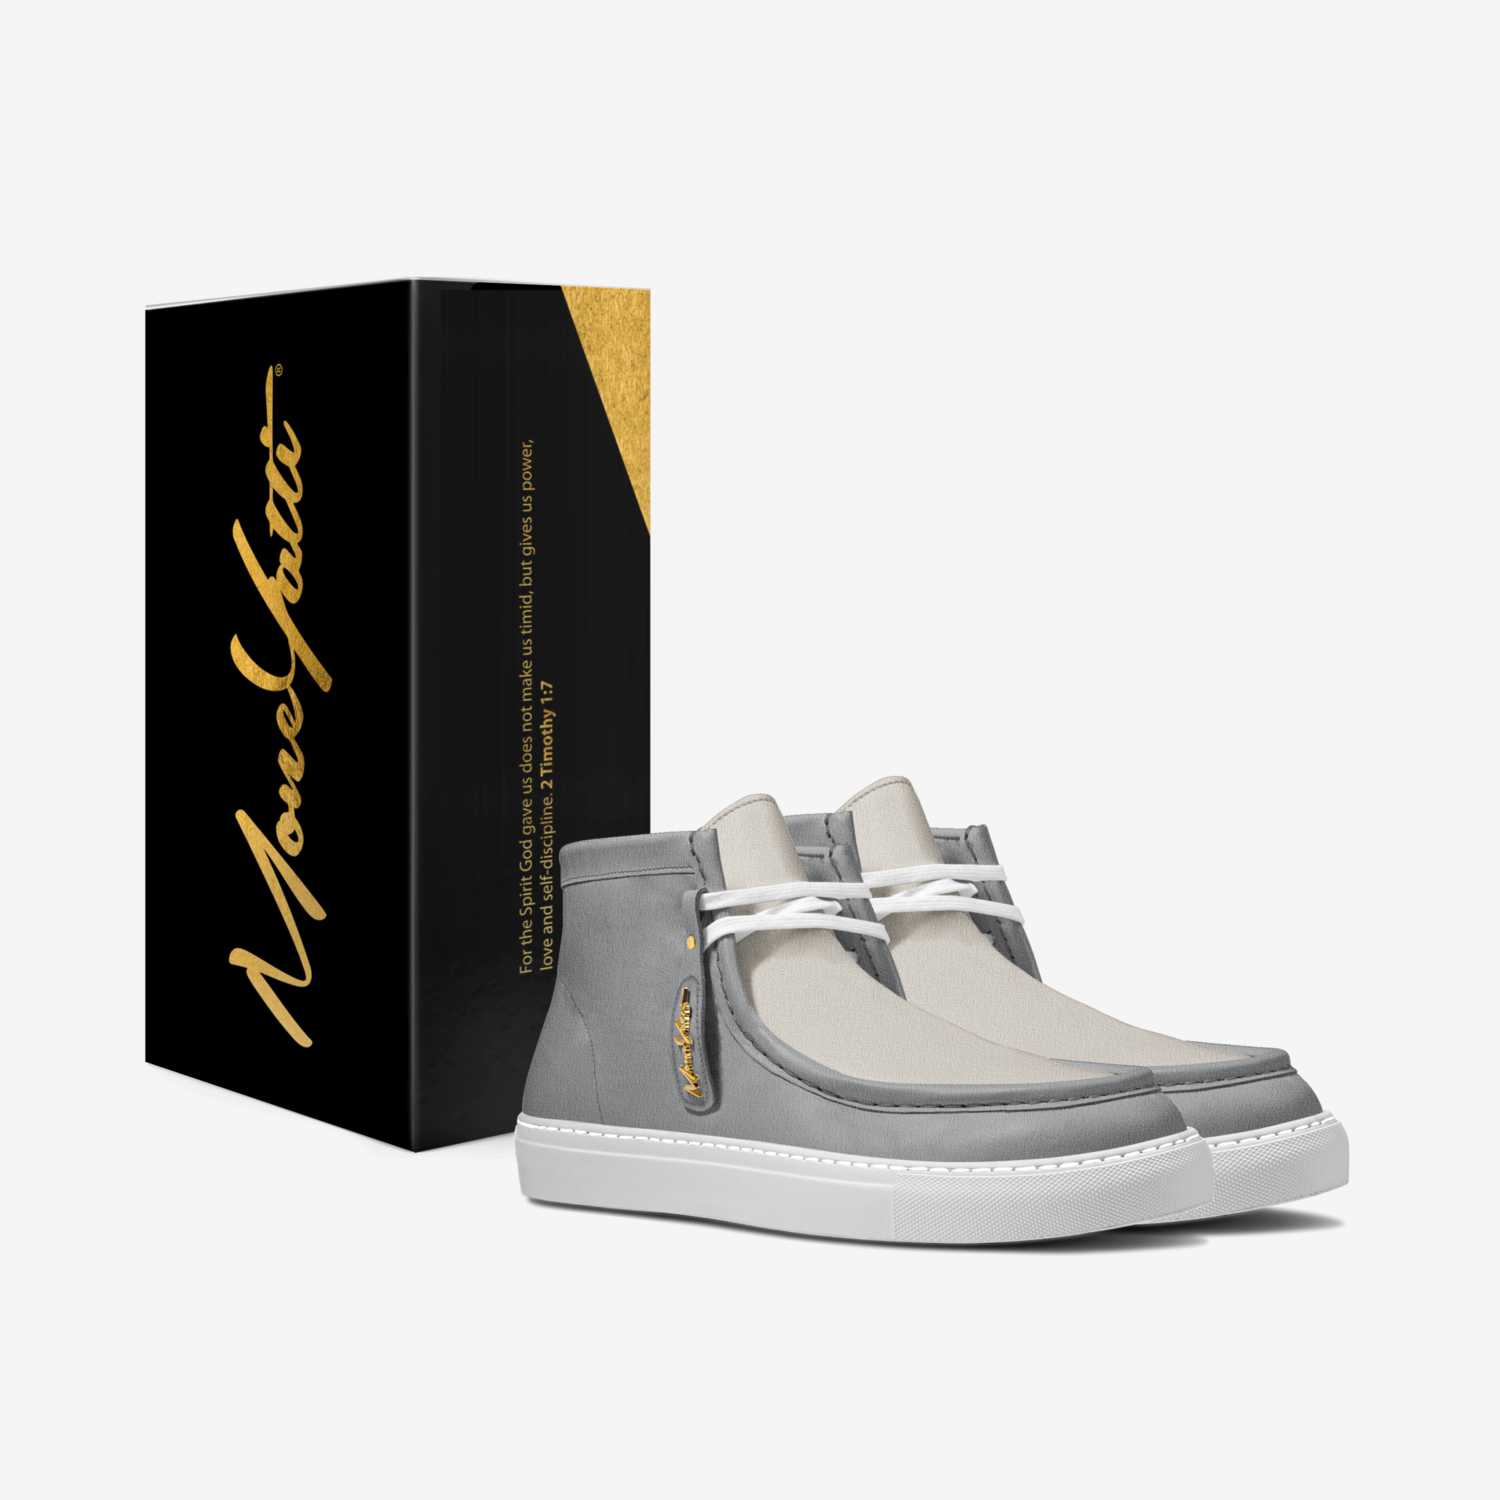 LUX SUEDE 2TONE 02 custom made in Italy shoes by Moneyatti Brand | Box view